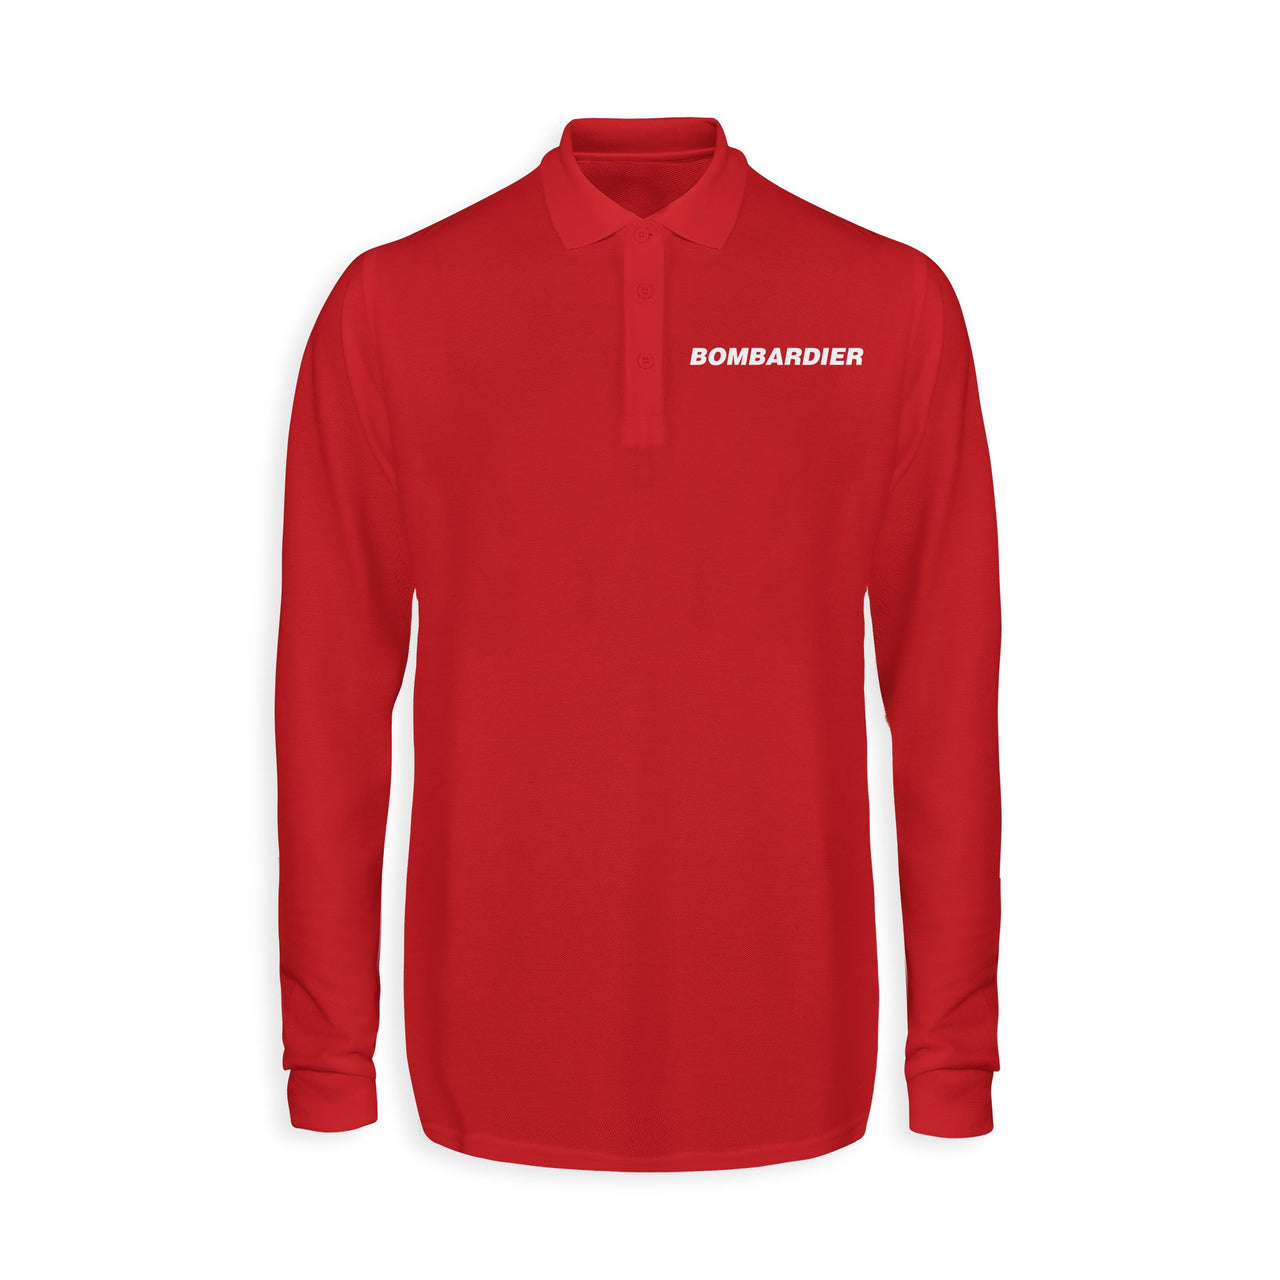 Bombardier & Text Designed Long Sleeve Polo T-Shirts